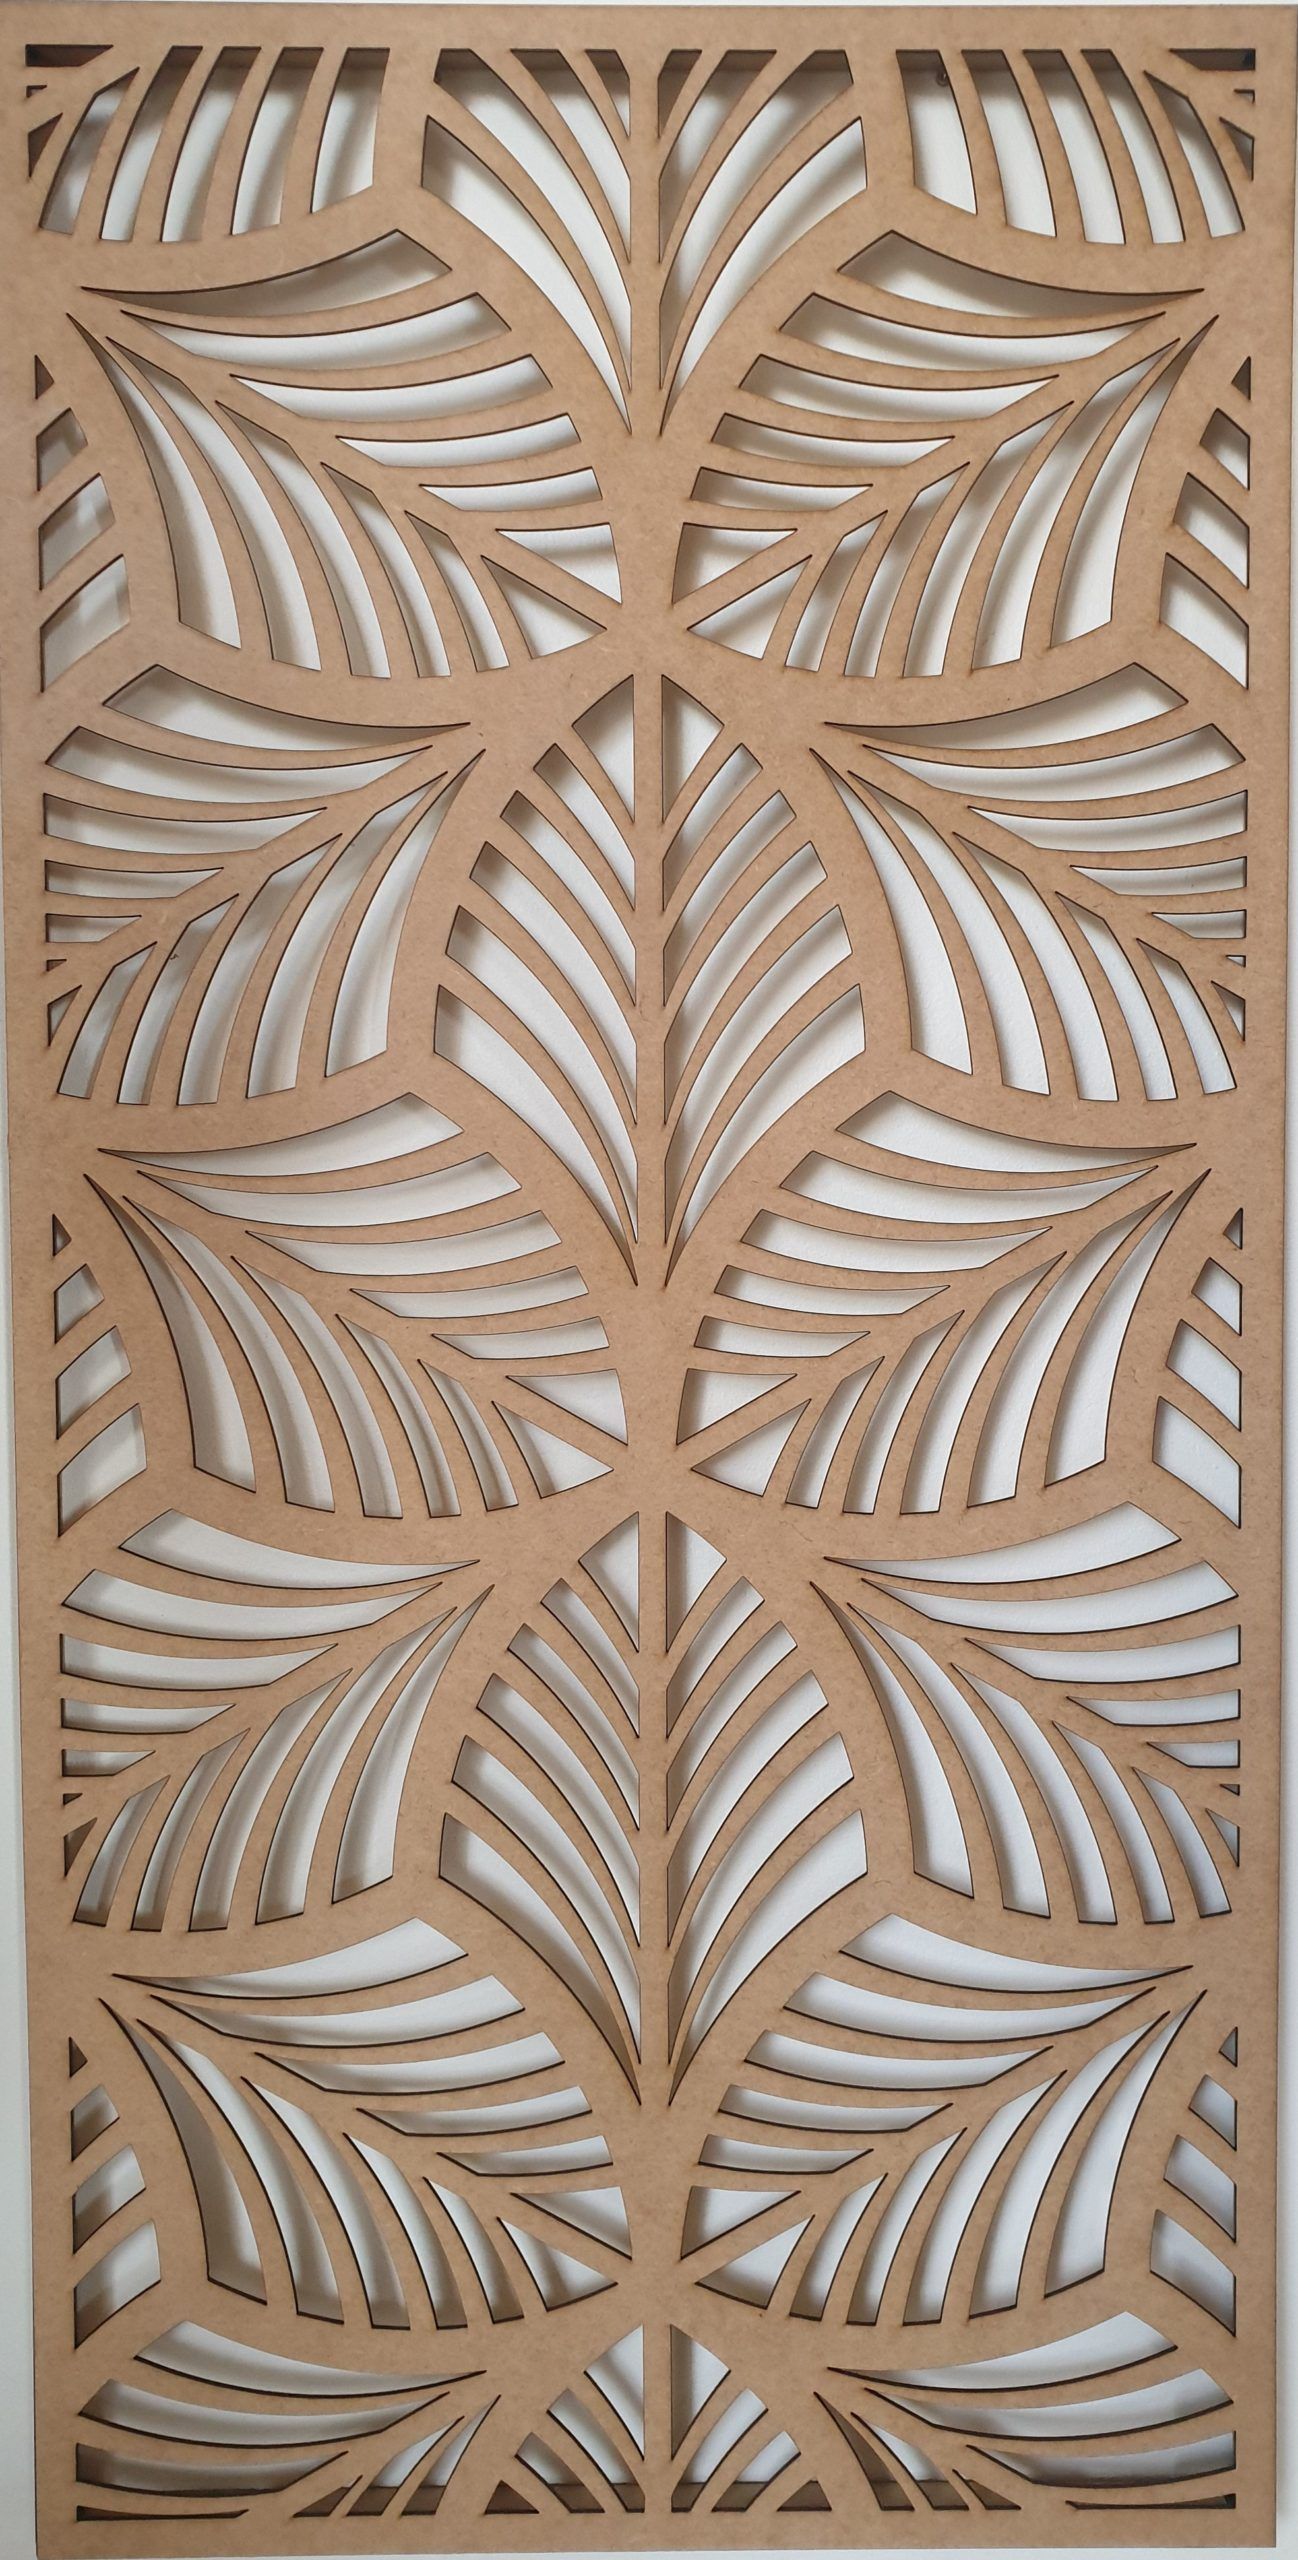 Summer Garden Decorative Wooden Wall Panel | Honey Badger Deco Pertaining To Most Recent Landscape Wood Wall Art (View 13 of 20)